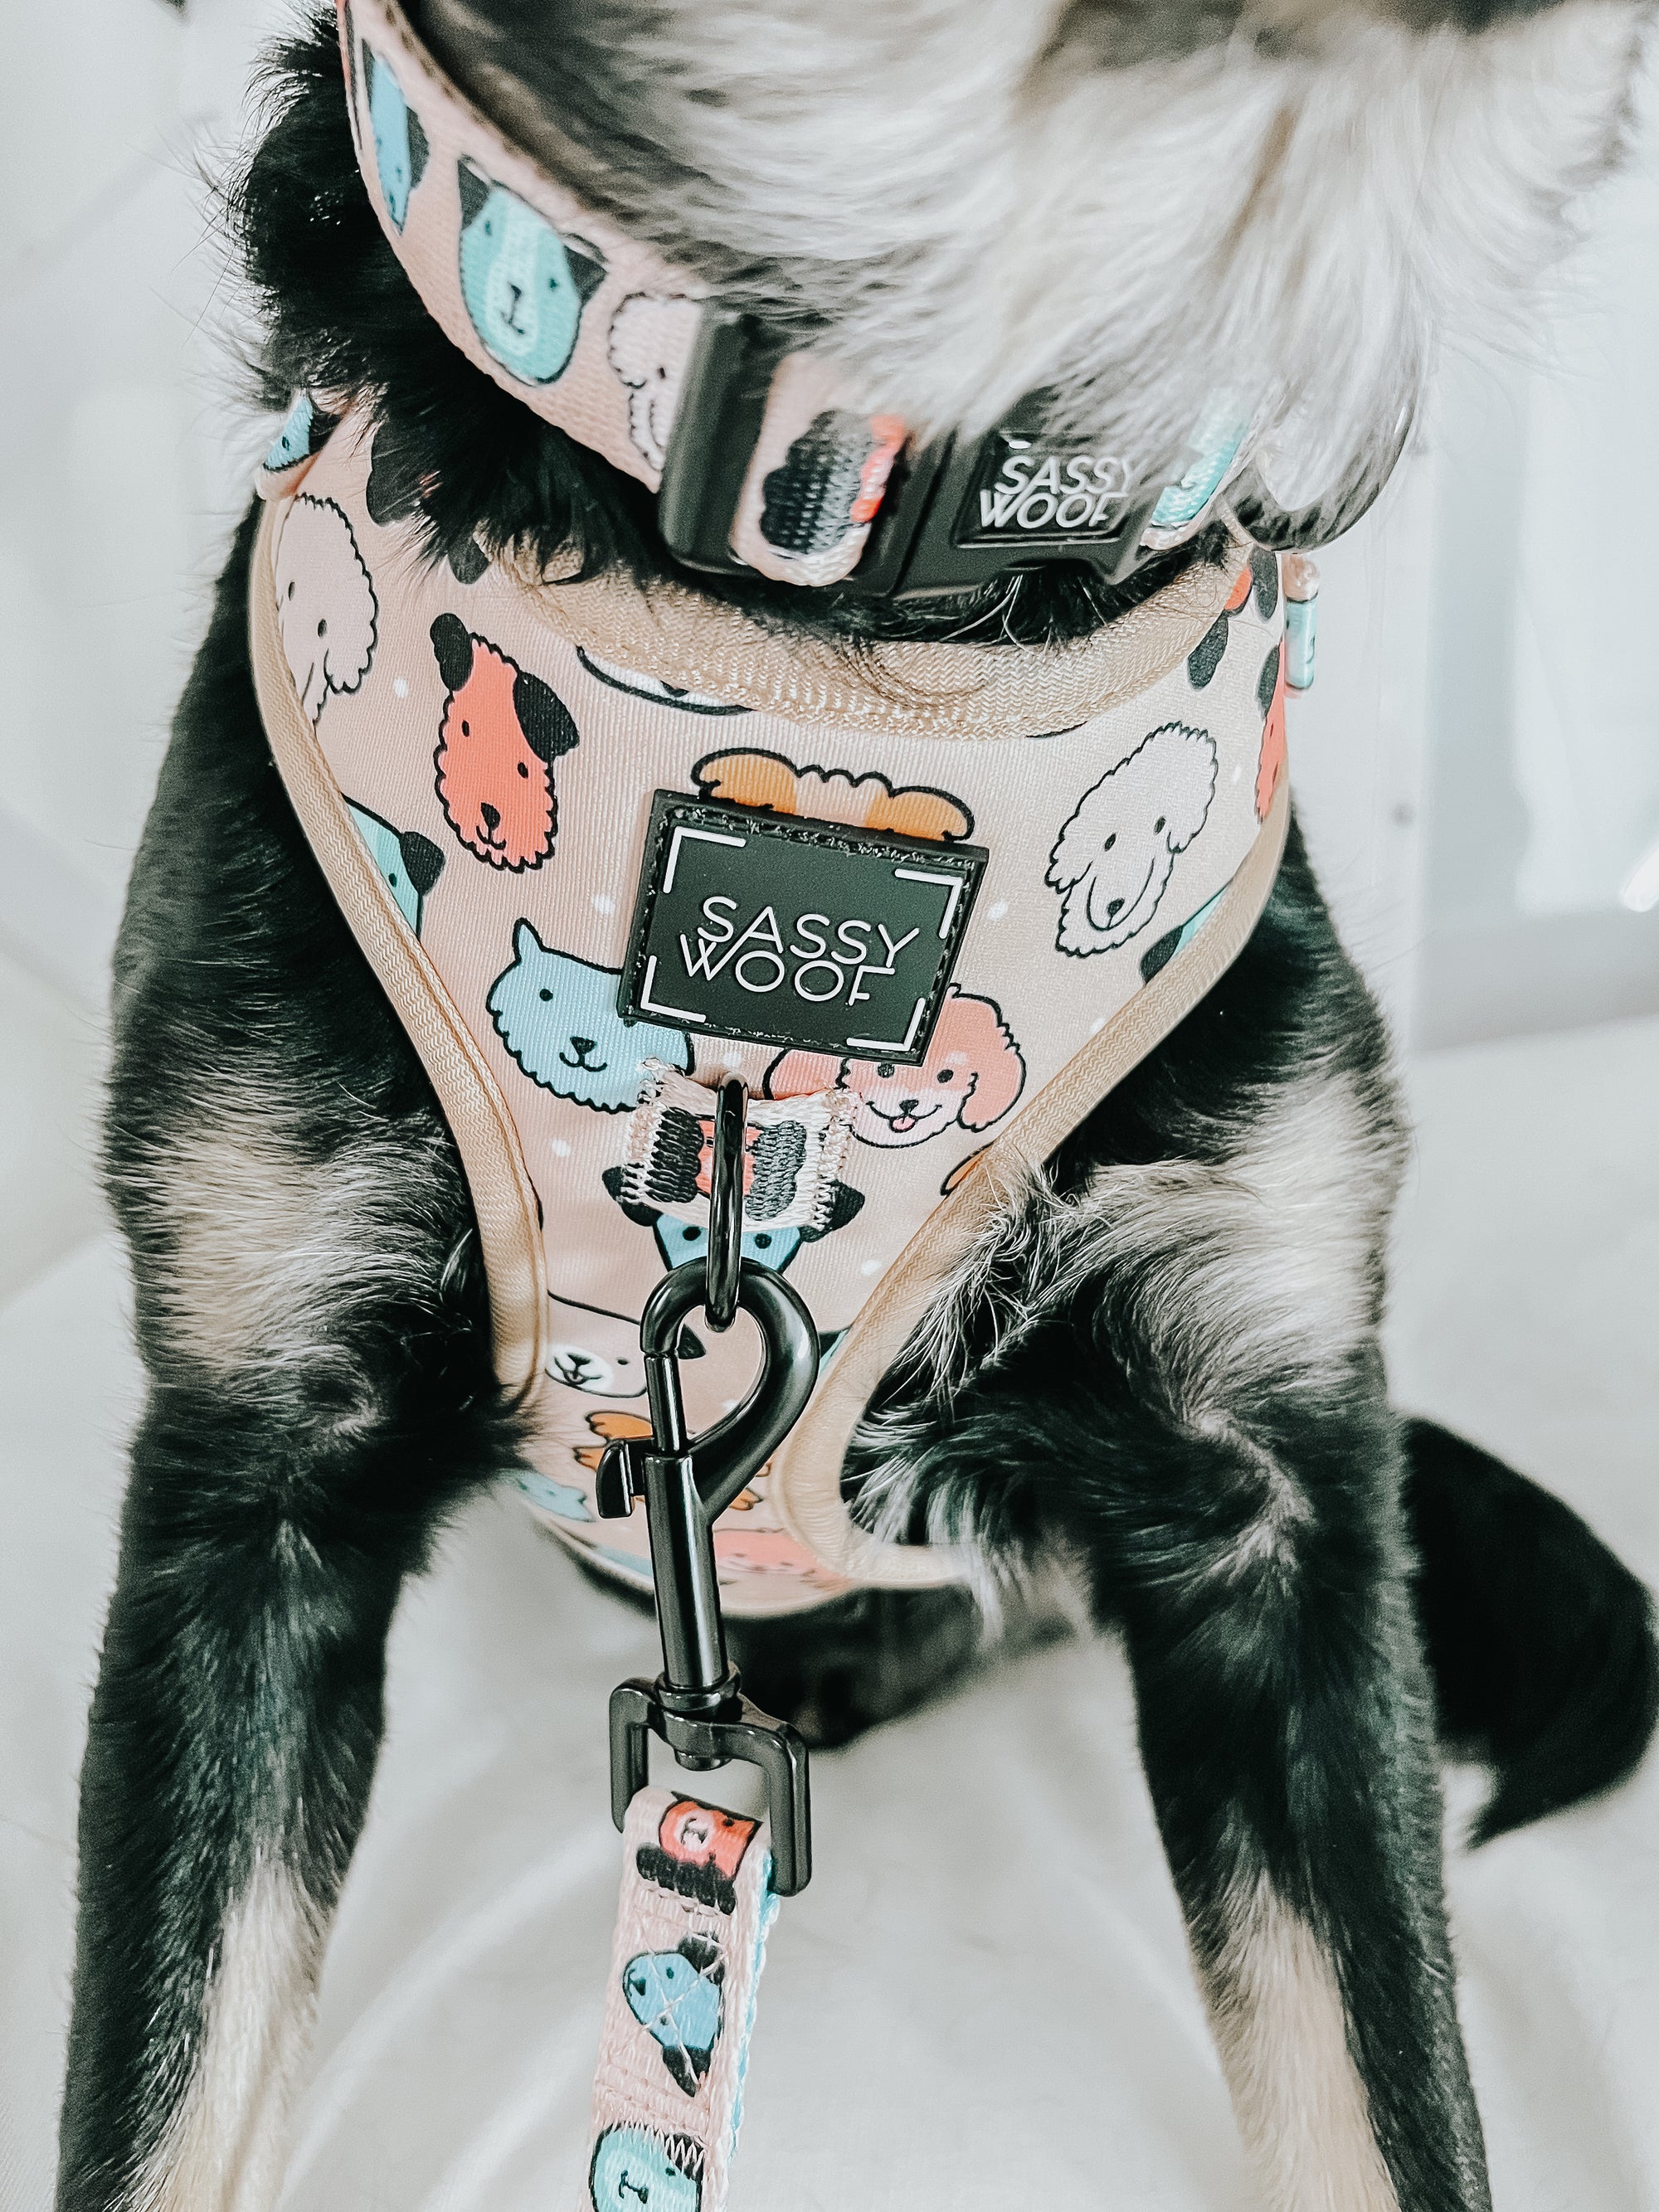 INFLUENCER_CONTENT | @CHAITOTHERESCUE | SIZE M & S